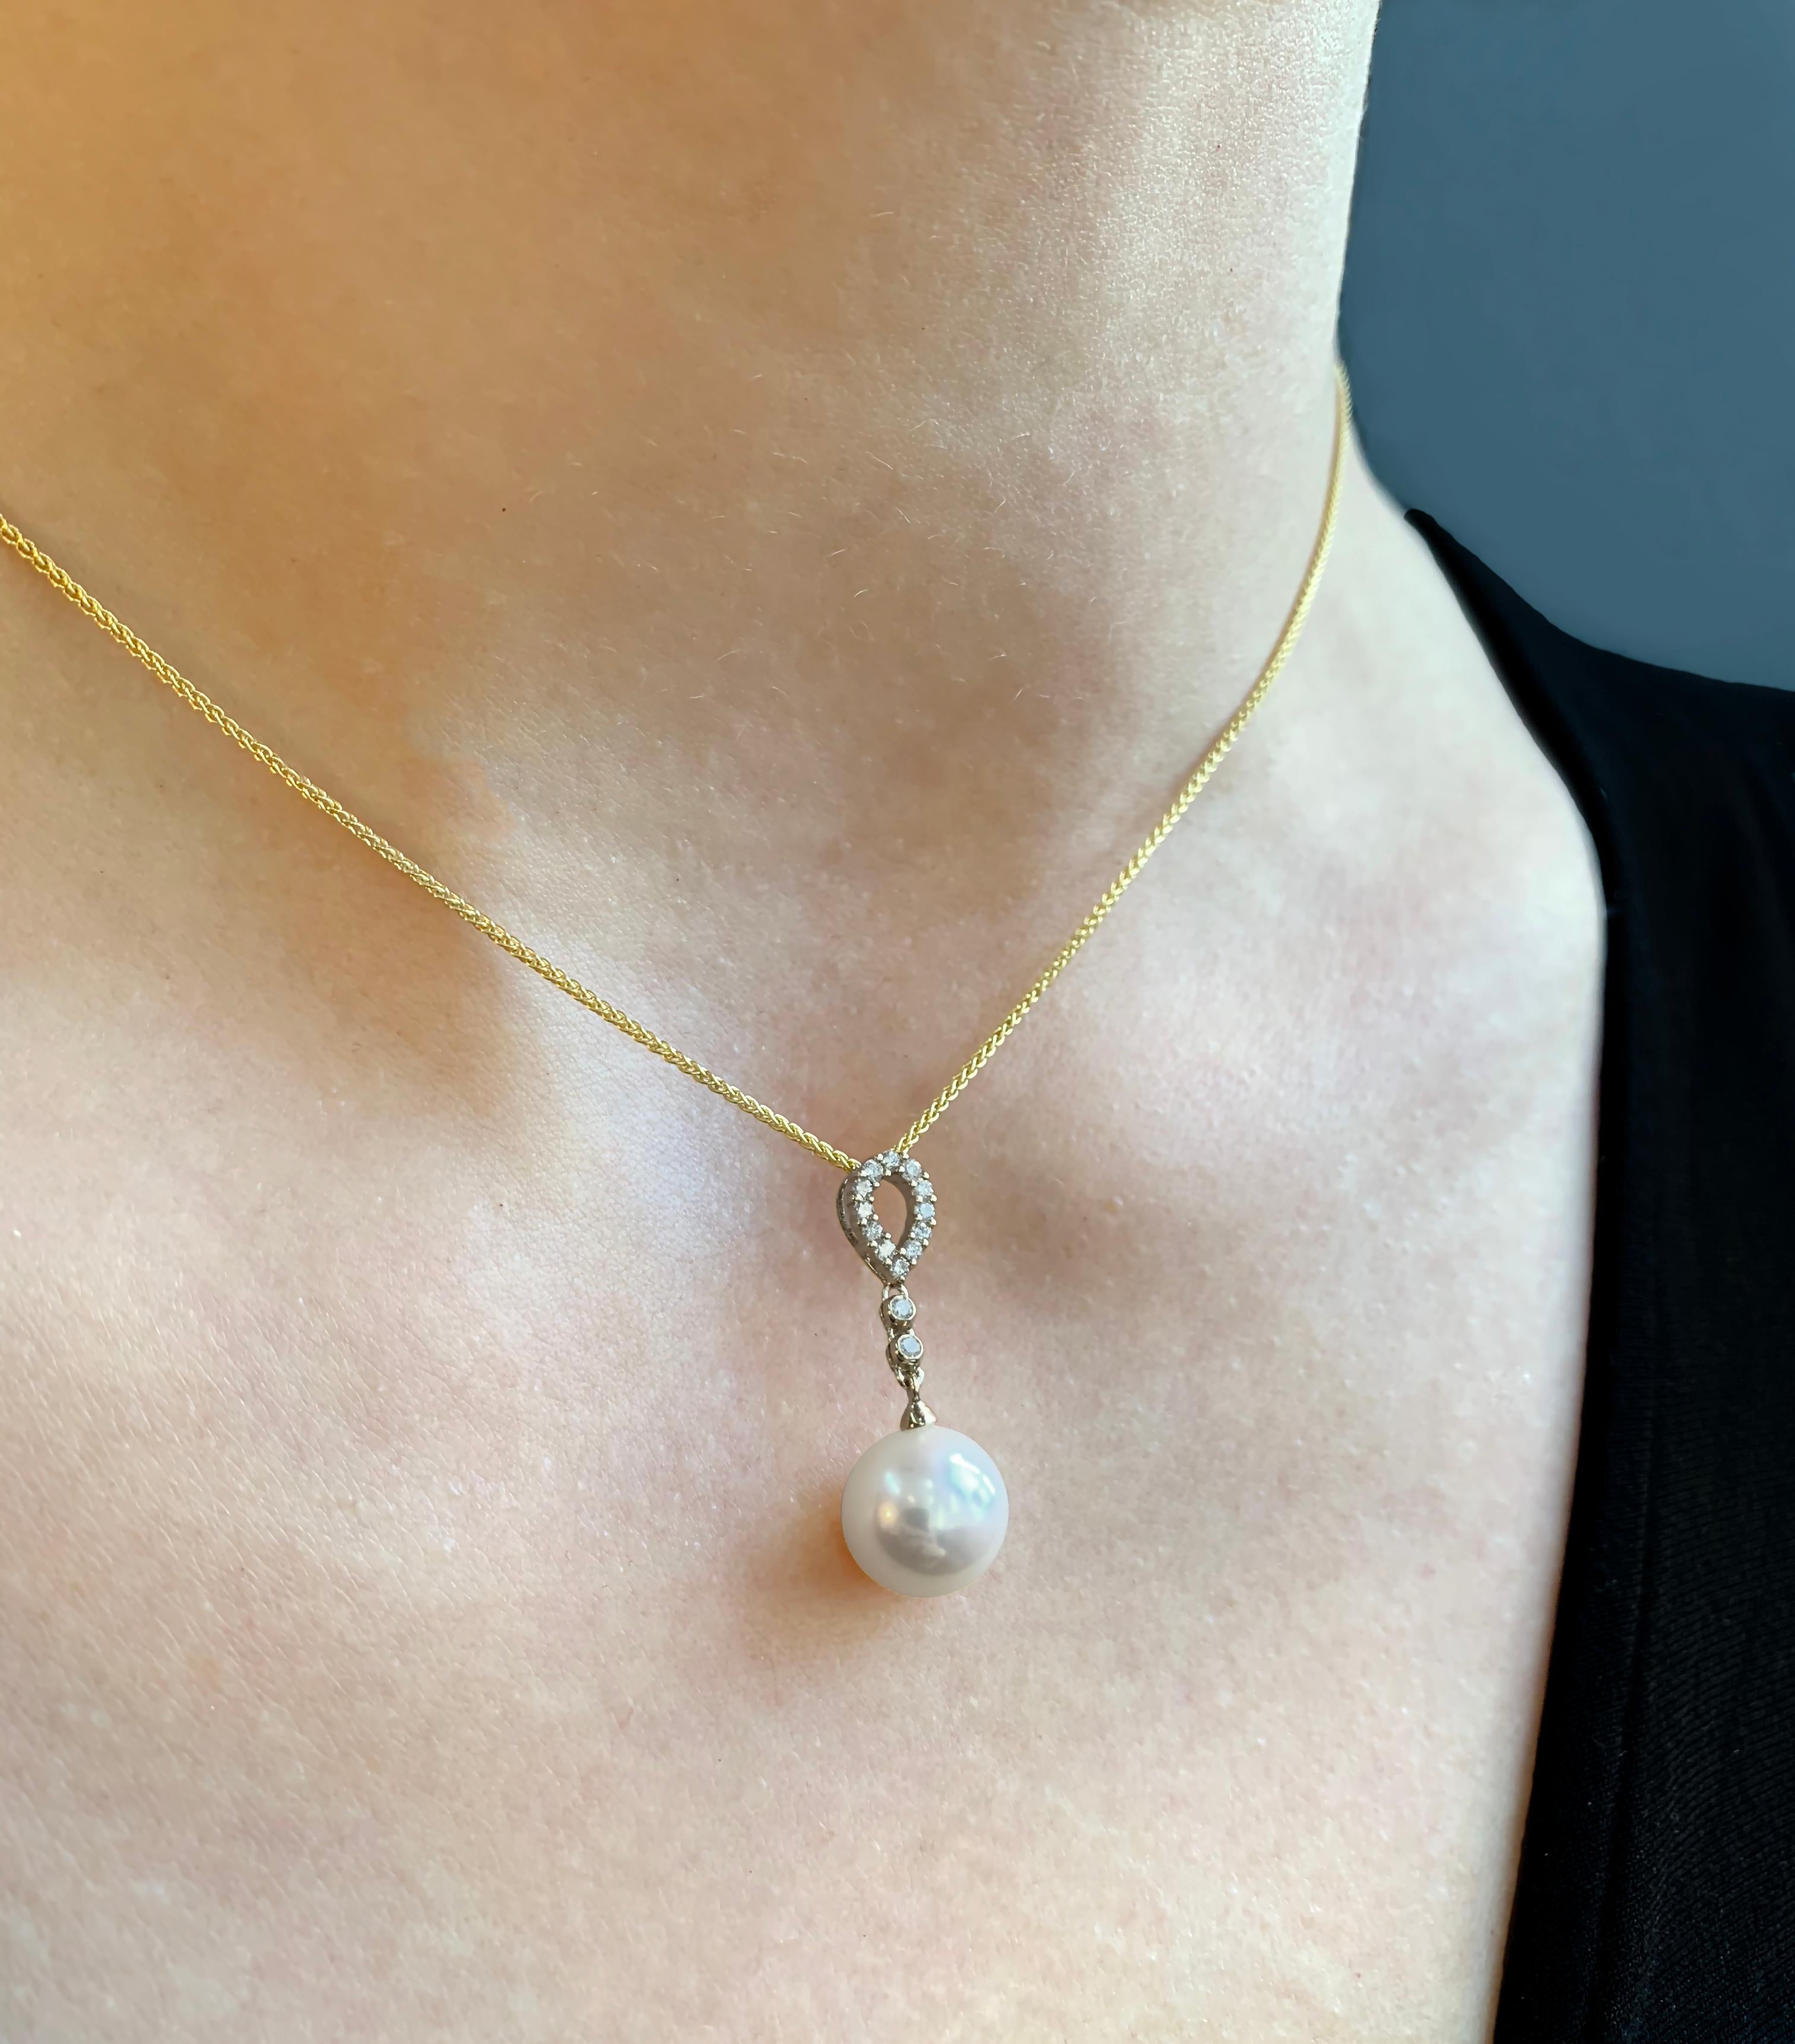 This delicate pendant by Yoko London features a lustrous Freshwater pearl beneath an elegant arrangement of diamonds. The 18 Karat Yellow Gold setting perfectly enriches the white colour of the diamonds and the lustre of the pearl. This elegant